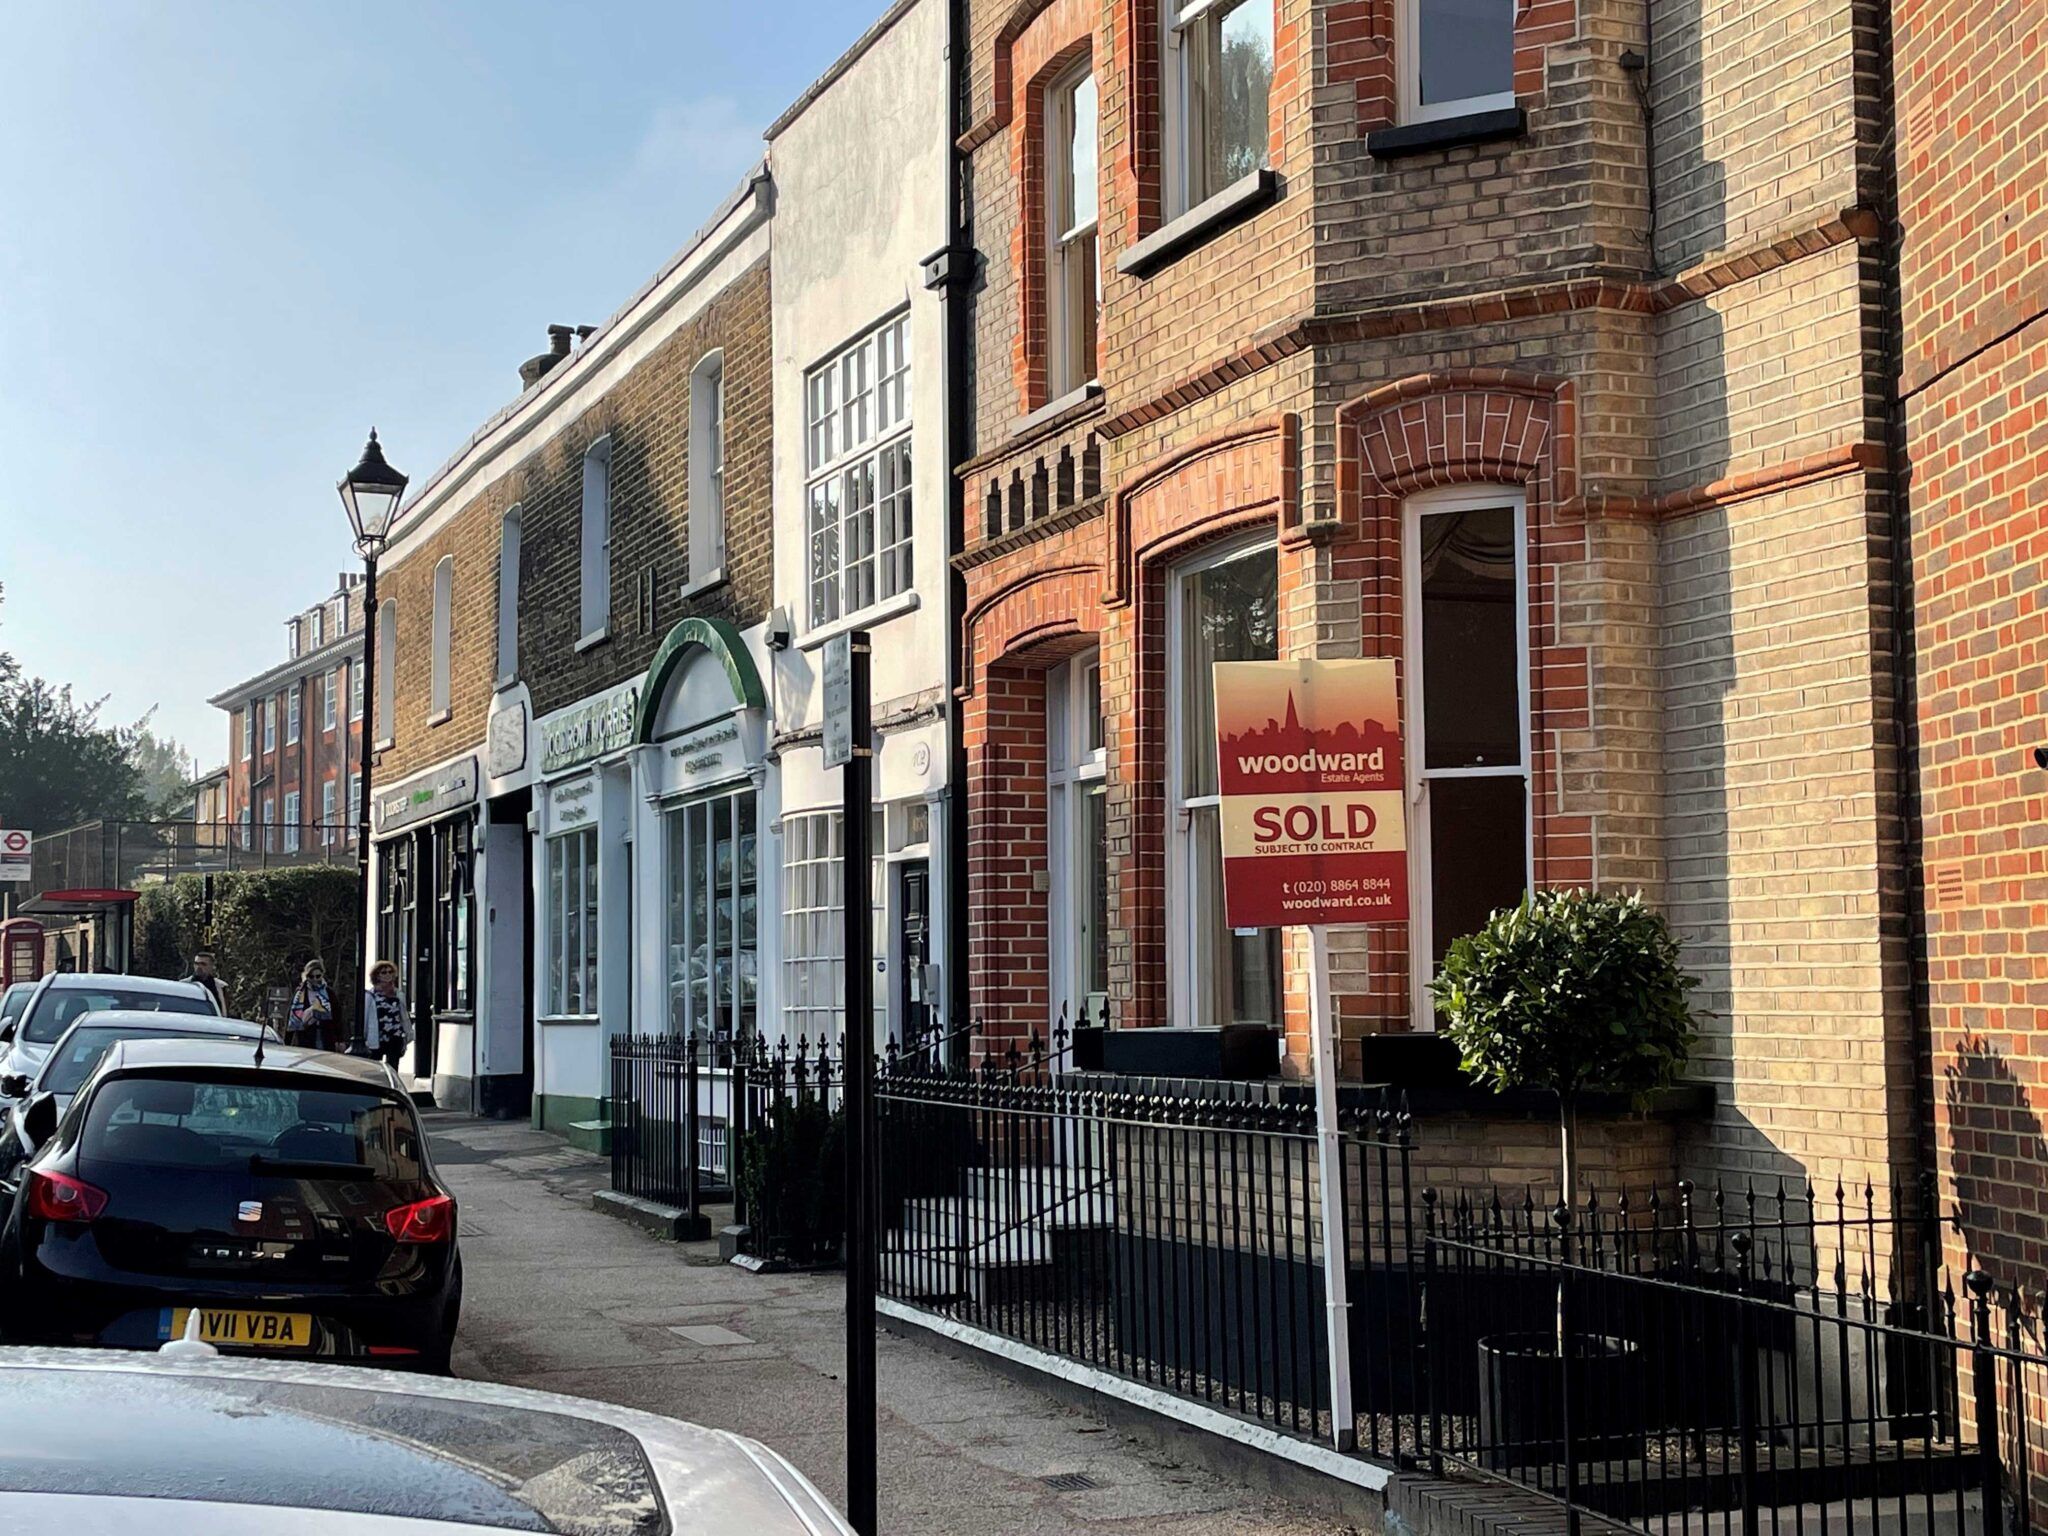 Experienced Probate Estate Agents in Harrow on the Hill